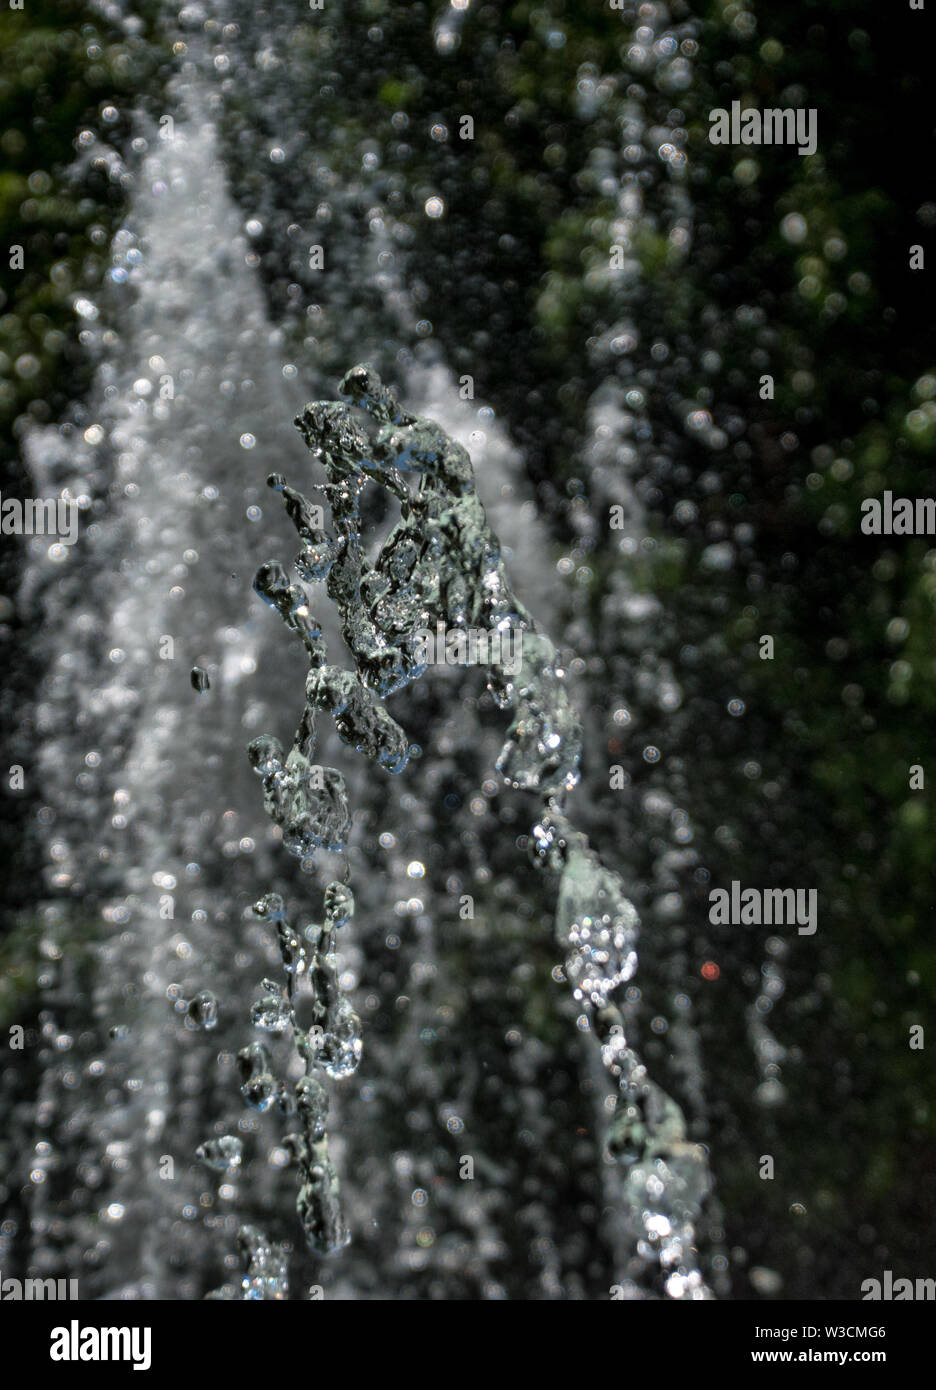 A jet of water droplets with a black blurred out background Stock Photo